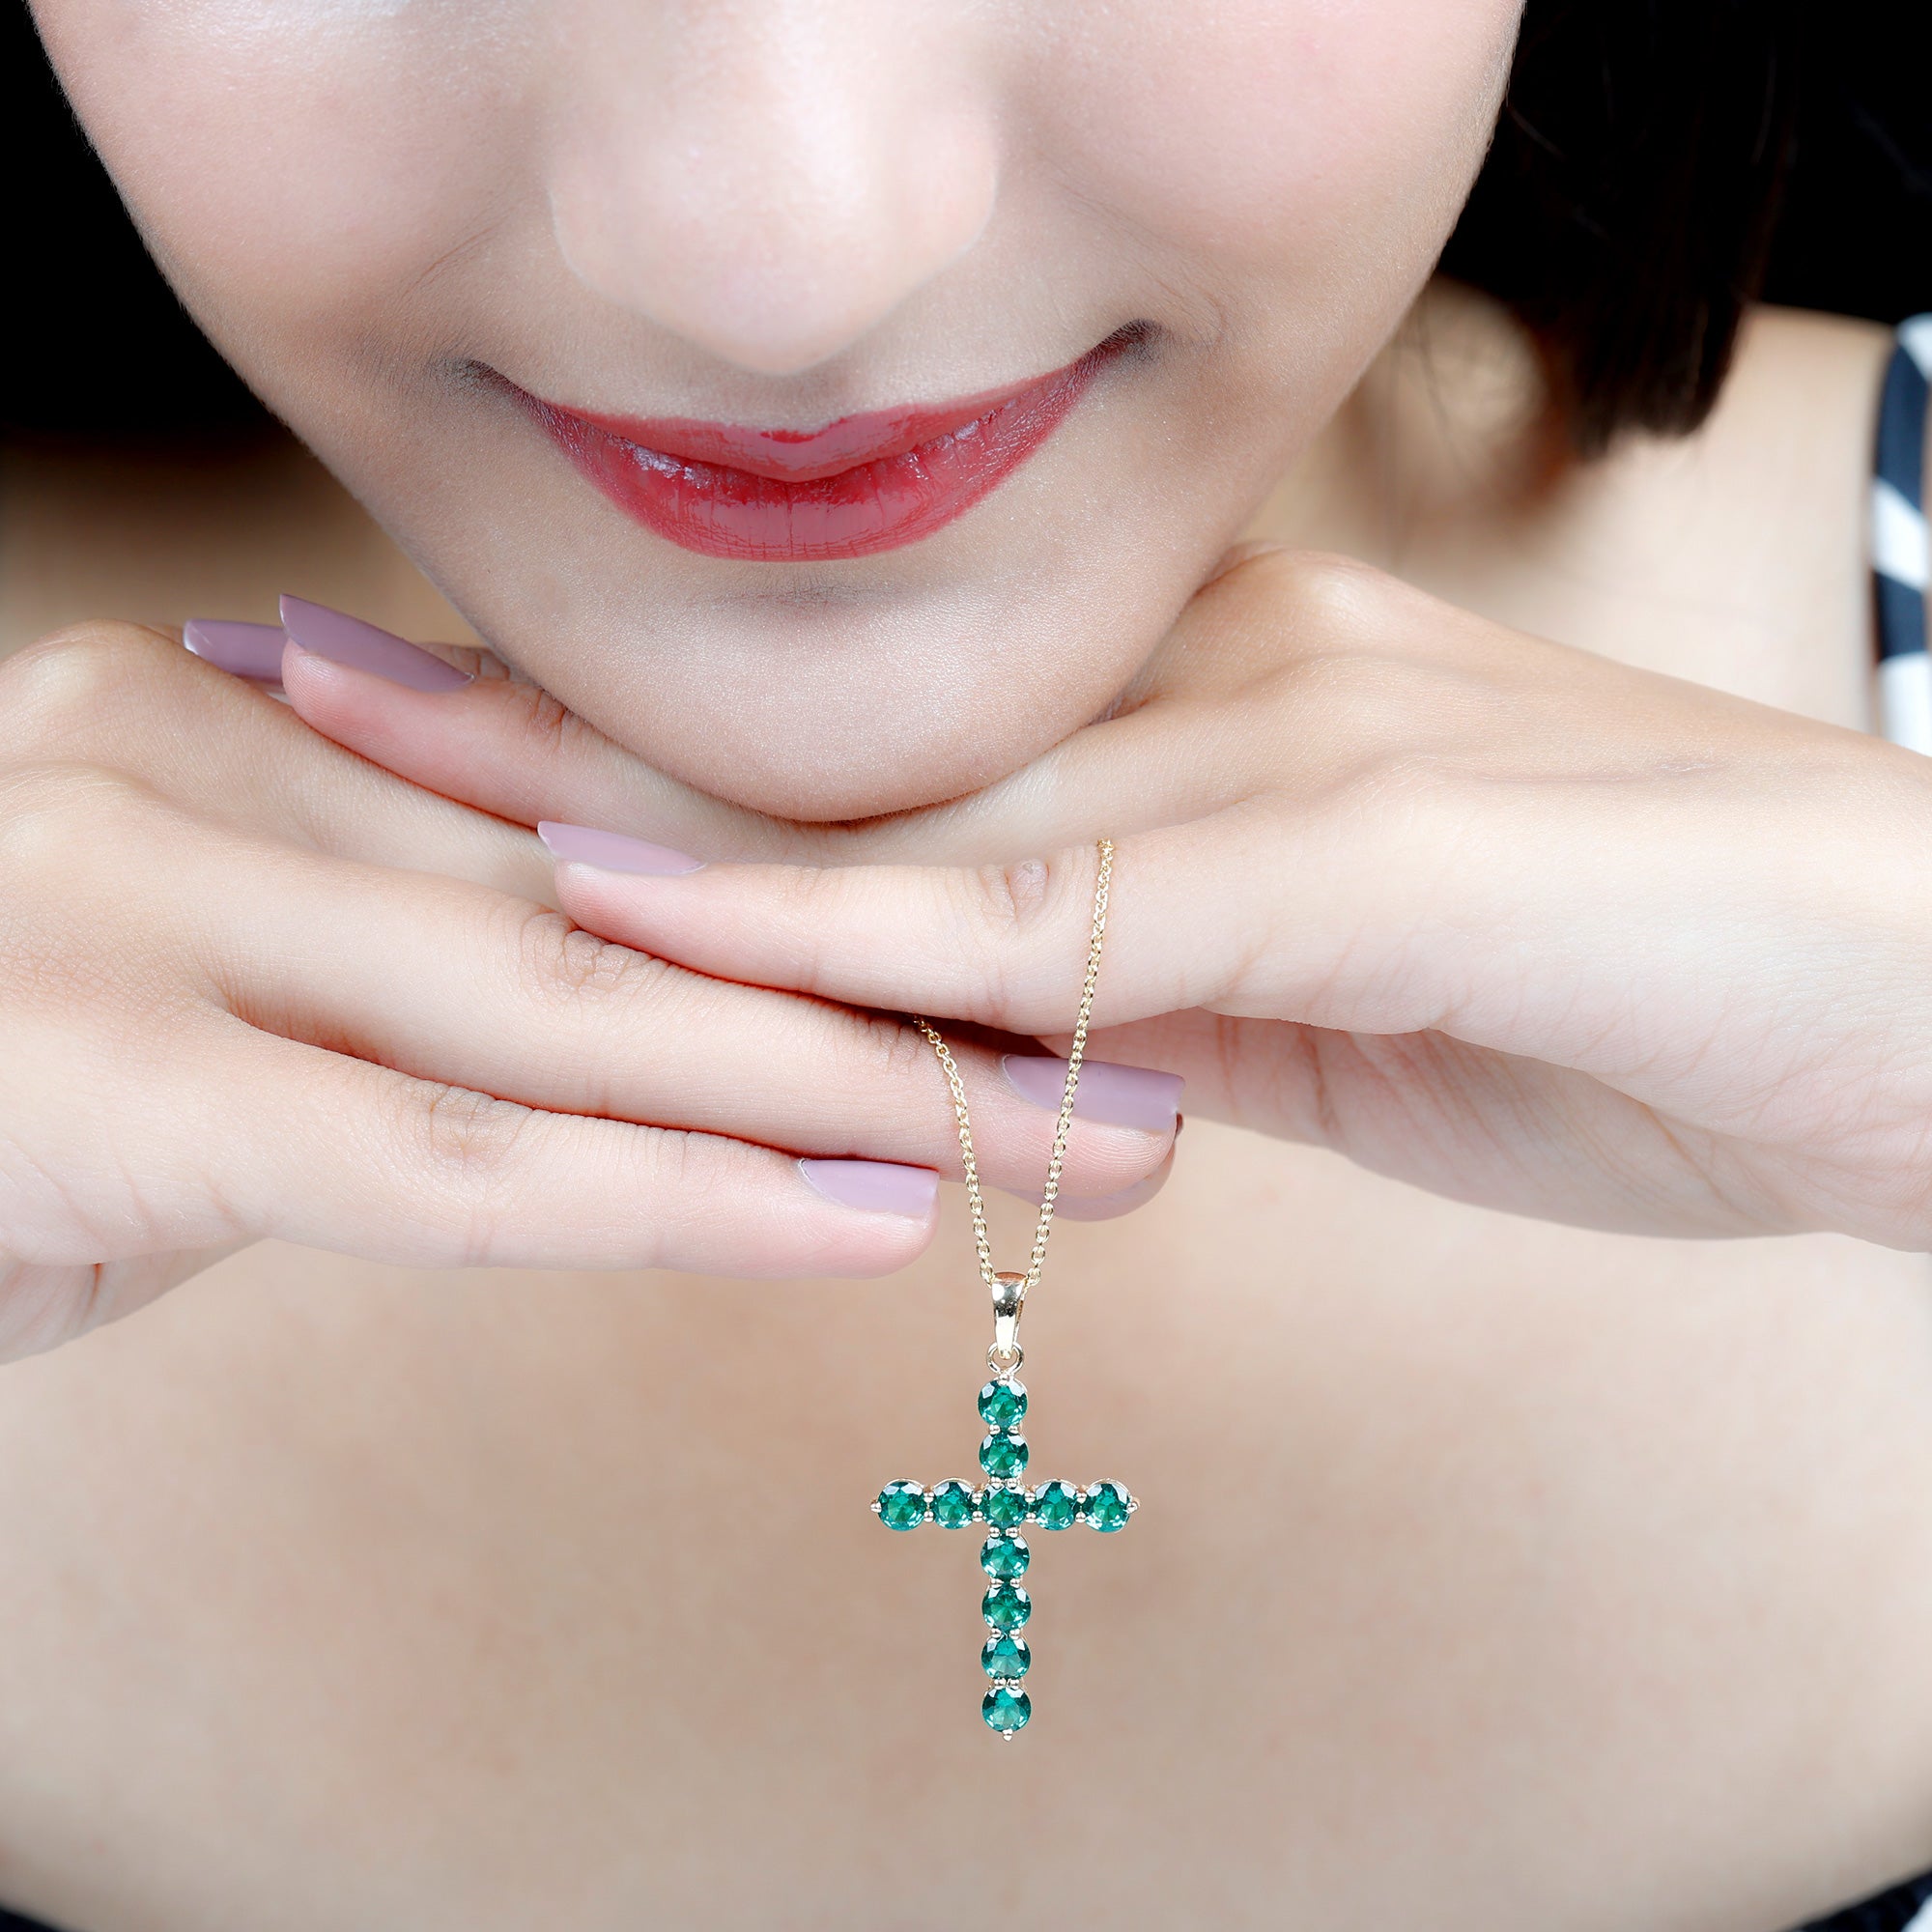 3 CT Created Emerald Cross Pendant Necklace in Gold Lab Created Emerald - ( AAAA ) - Quality - Rosec Jewels